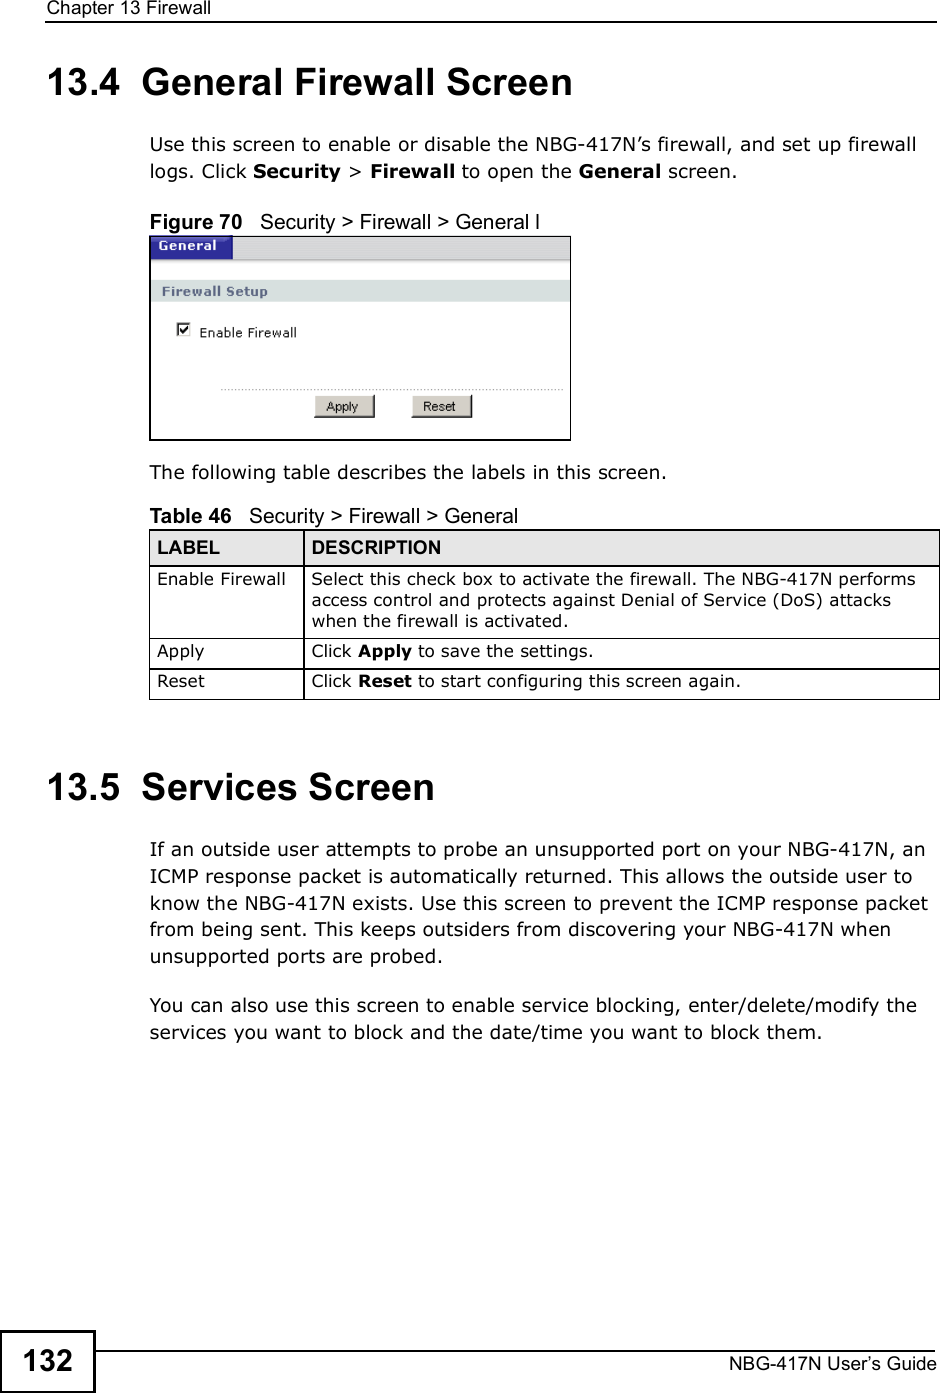 Chapter 13FirewallNBG-417N User s Guide13213.4  General Firewall Screen   Use this screen to enable or disable the NBG-417N!s firewall, and set up firewall logs. Click Security &gt; Firewall to open the General screen.Figure 70   Security &gt; Firewall &gt; General lThe following table describes the labels in this screen.13.5  Services Screen   If an outside user attempts to probe an unsupported port on your NBG-417N, an ICMP response packet is automatically returned. This allows the outside user to know the NBG-417N exists. Use this screen to prevent the ICMP response packet from being sent. This keeps outsiders from discovering your NBG-417N when unsupported ports are probed.You can also use this screen to enable service blocking, enter/delete/modify the services you want to block and the date/time you want to block them.Table 46   Security &gt; Firewall &gt; General LABEL DESCRIPTIONEnable FirewallSelect this check box to activate the firewall. The NBG-417N performs access control and protects against Denial of Service (DoS) attacks when the firewall is activated.Apply Click Apply to save the settings. Reset Click Reset to start configuring this screen again. 